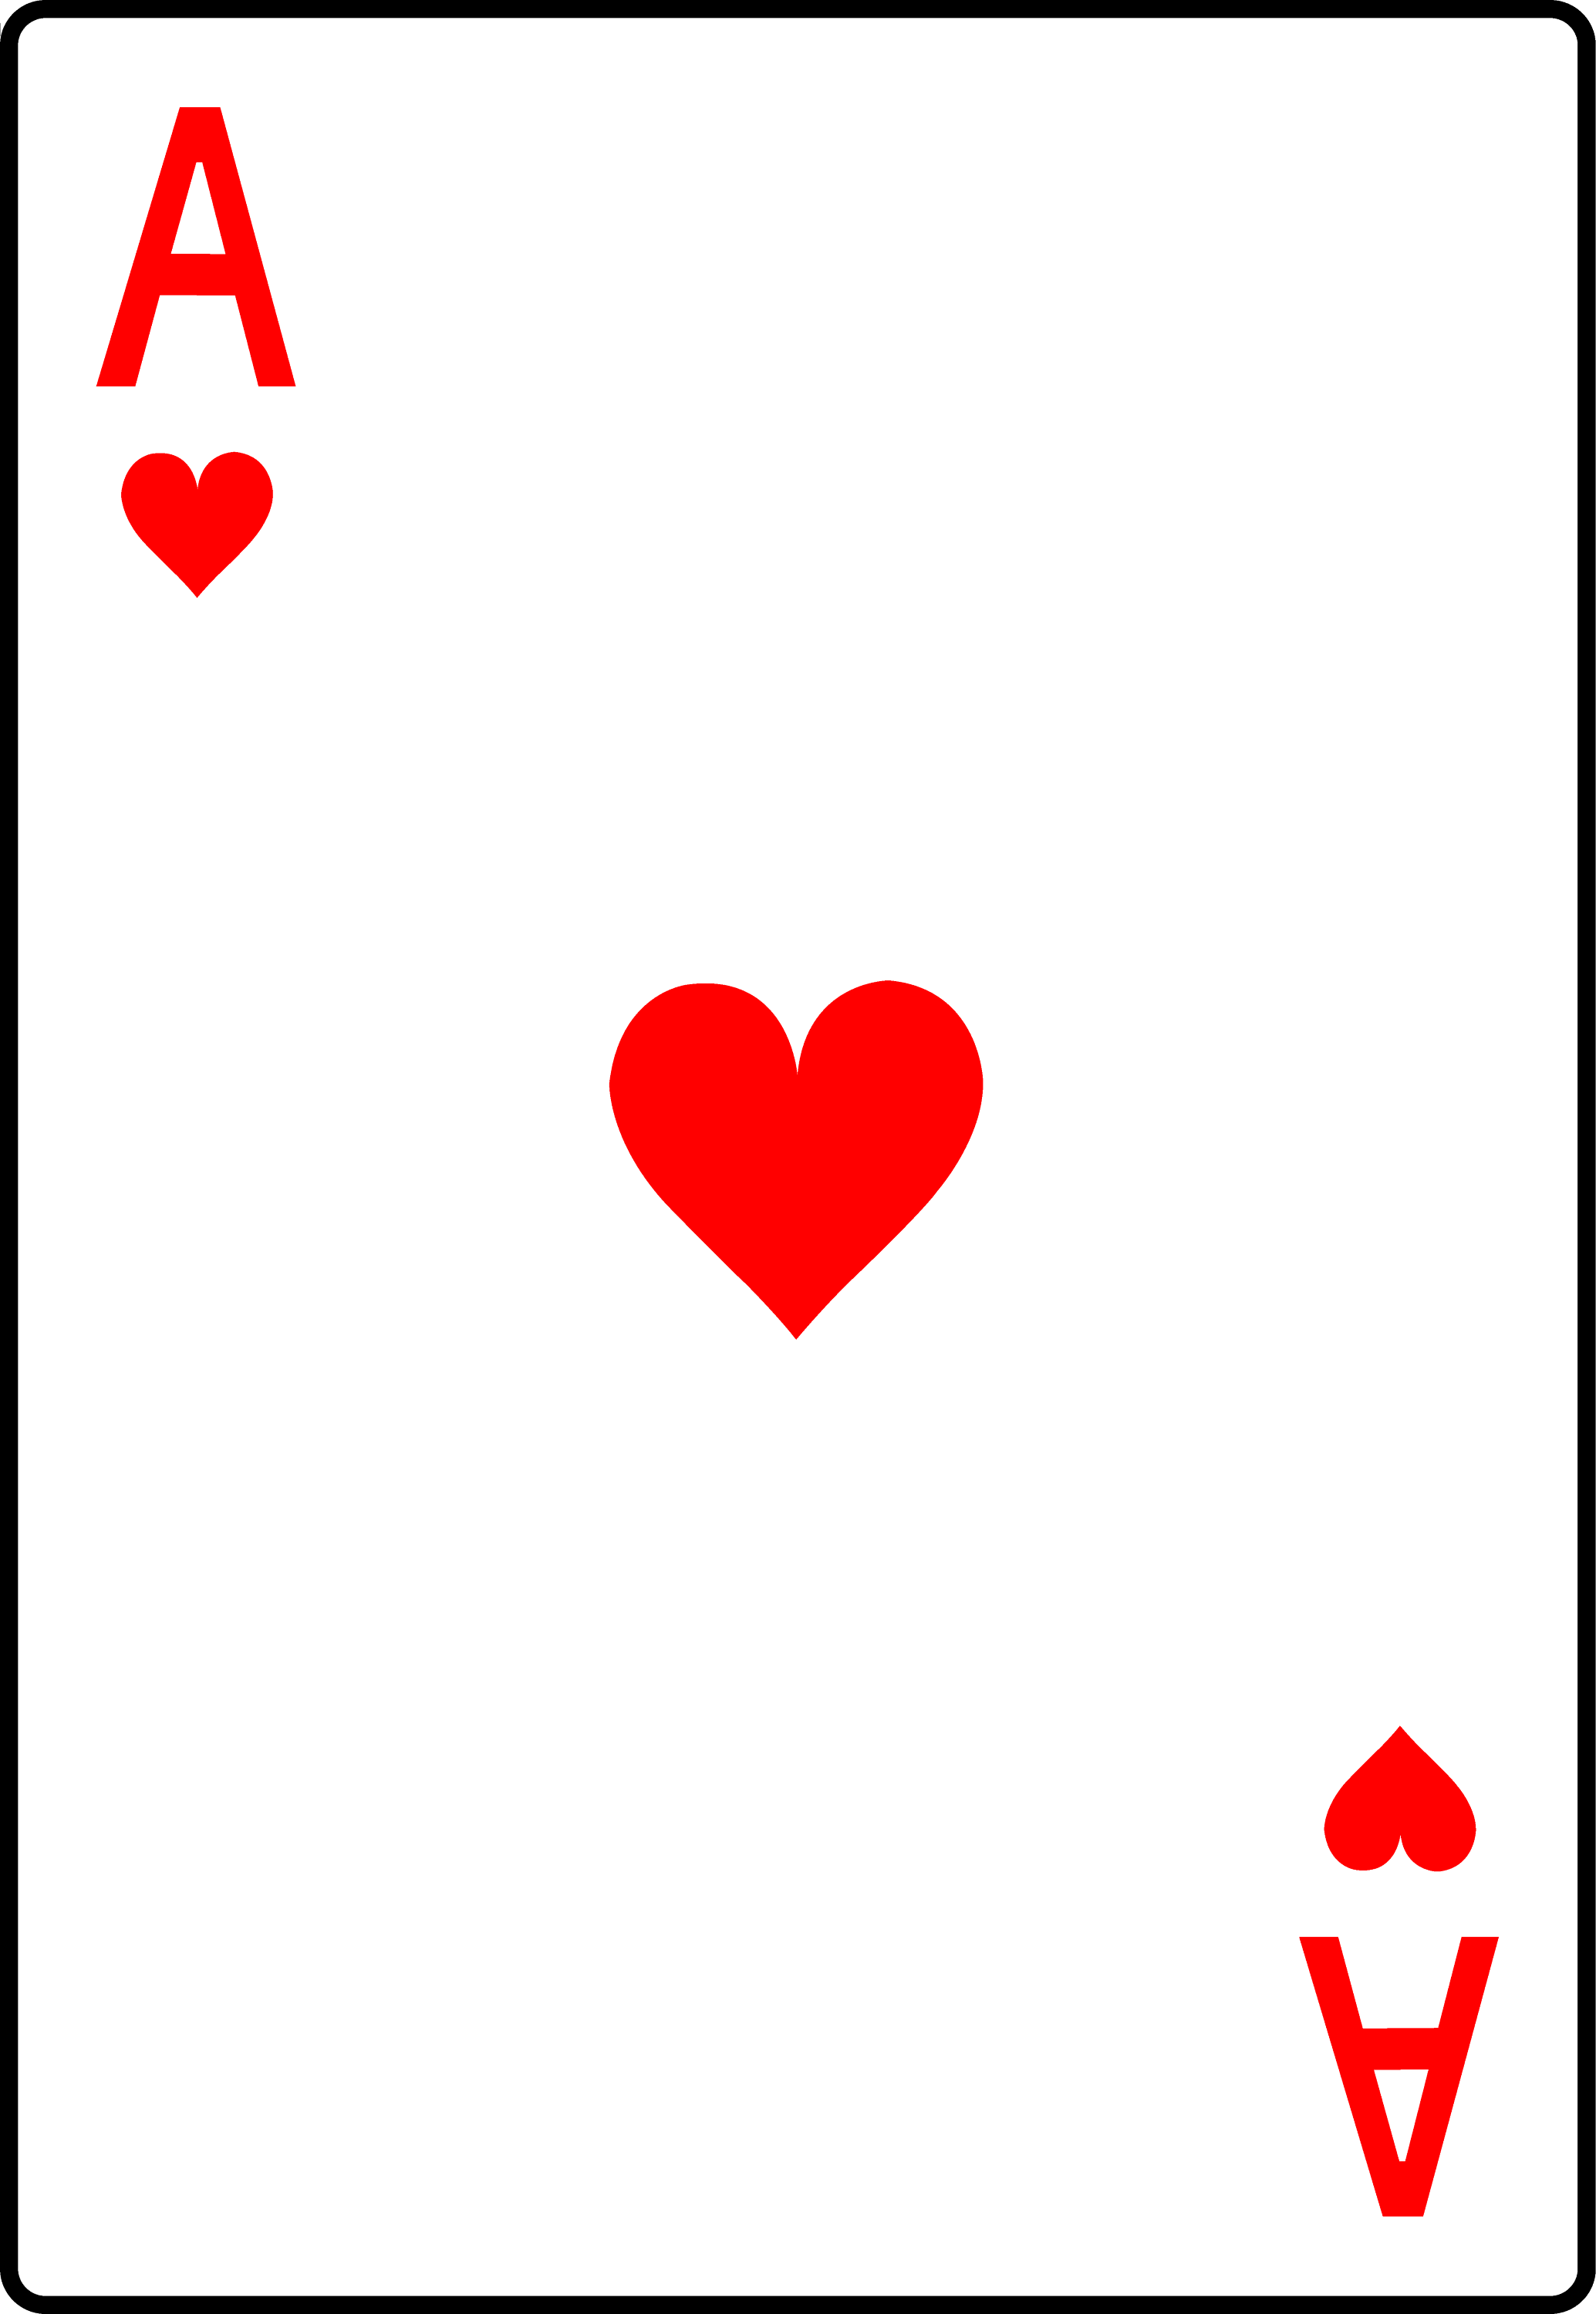 play cards clipart - photo #48